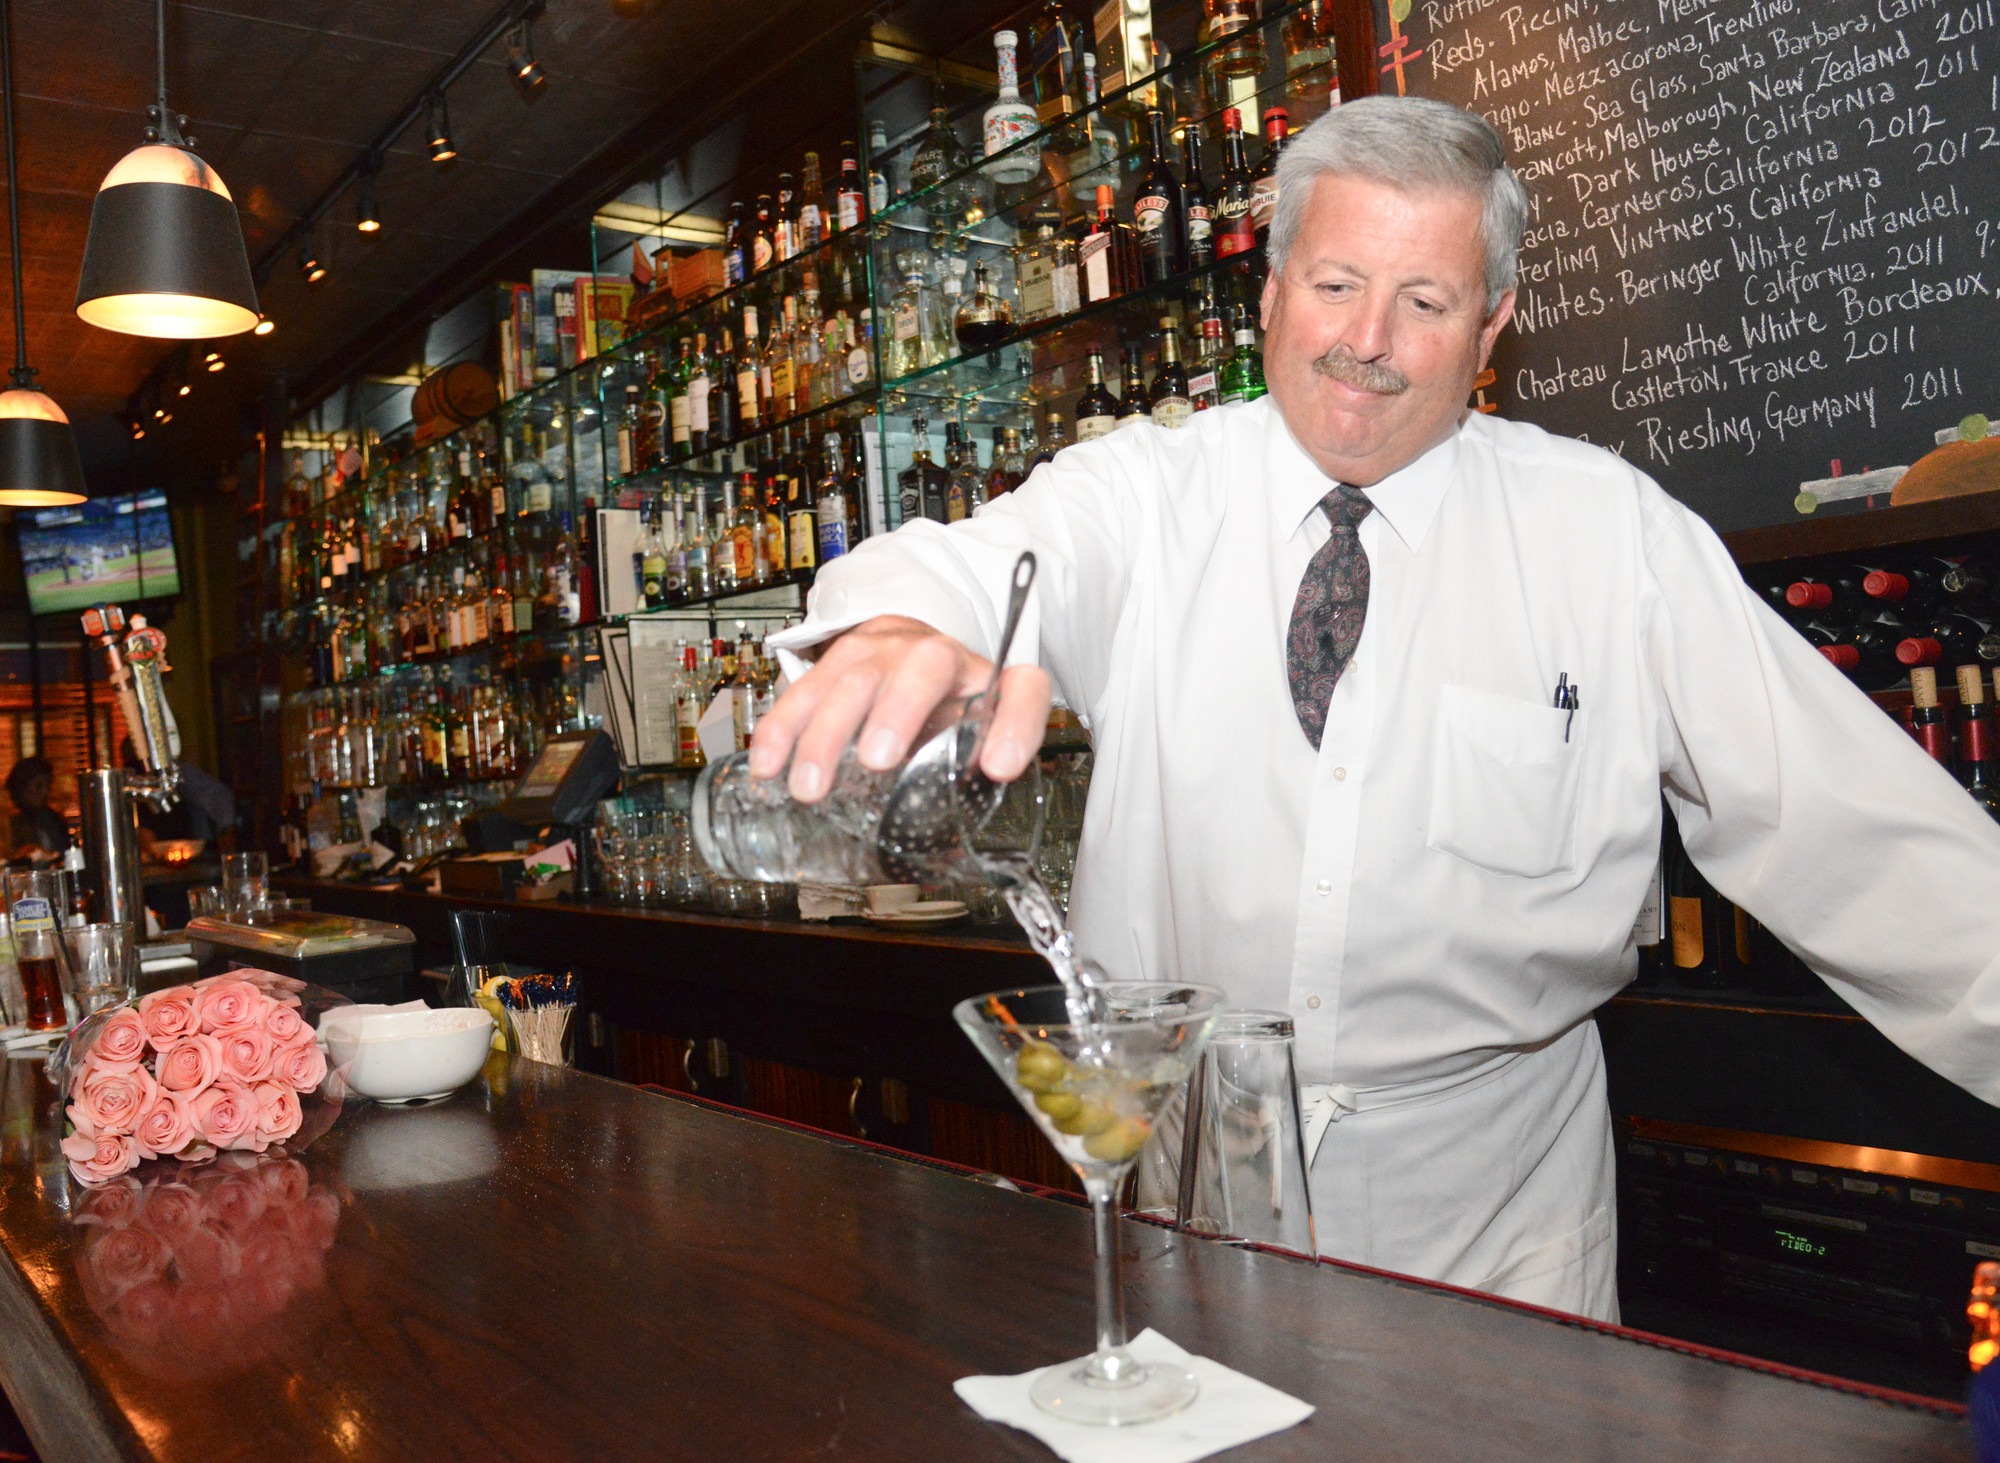 Bartender Manny Libow poured the new signature drink: the George Martini. Libow has been with the restaurant since it opened 25 years ago.